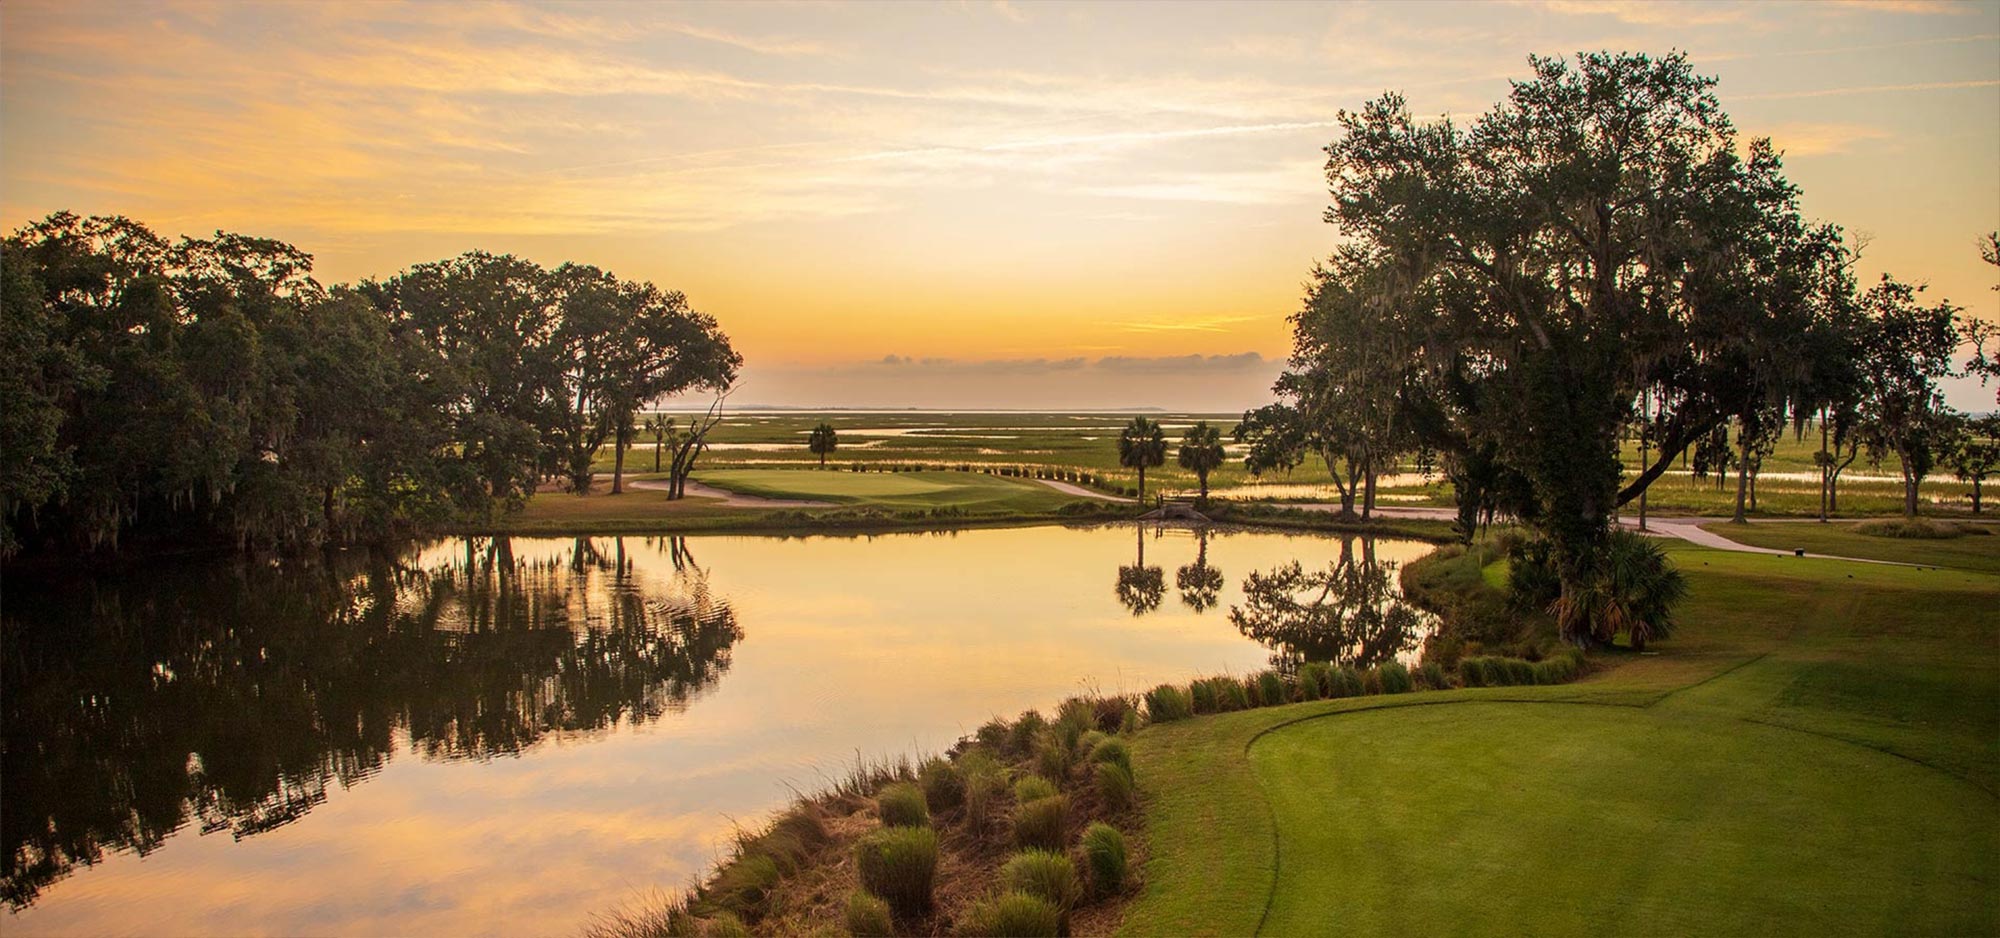 Sunset view of Romerly Marsh, the Marshwood golf course's 12th hole, lined with oak and pine trees, is considered the most scenic at The Landings.